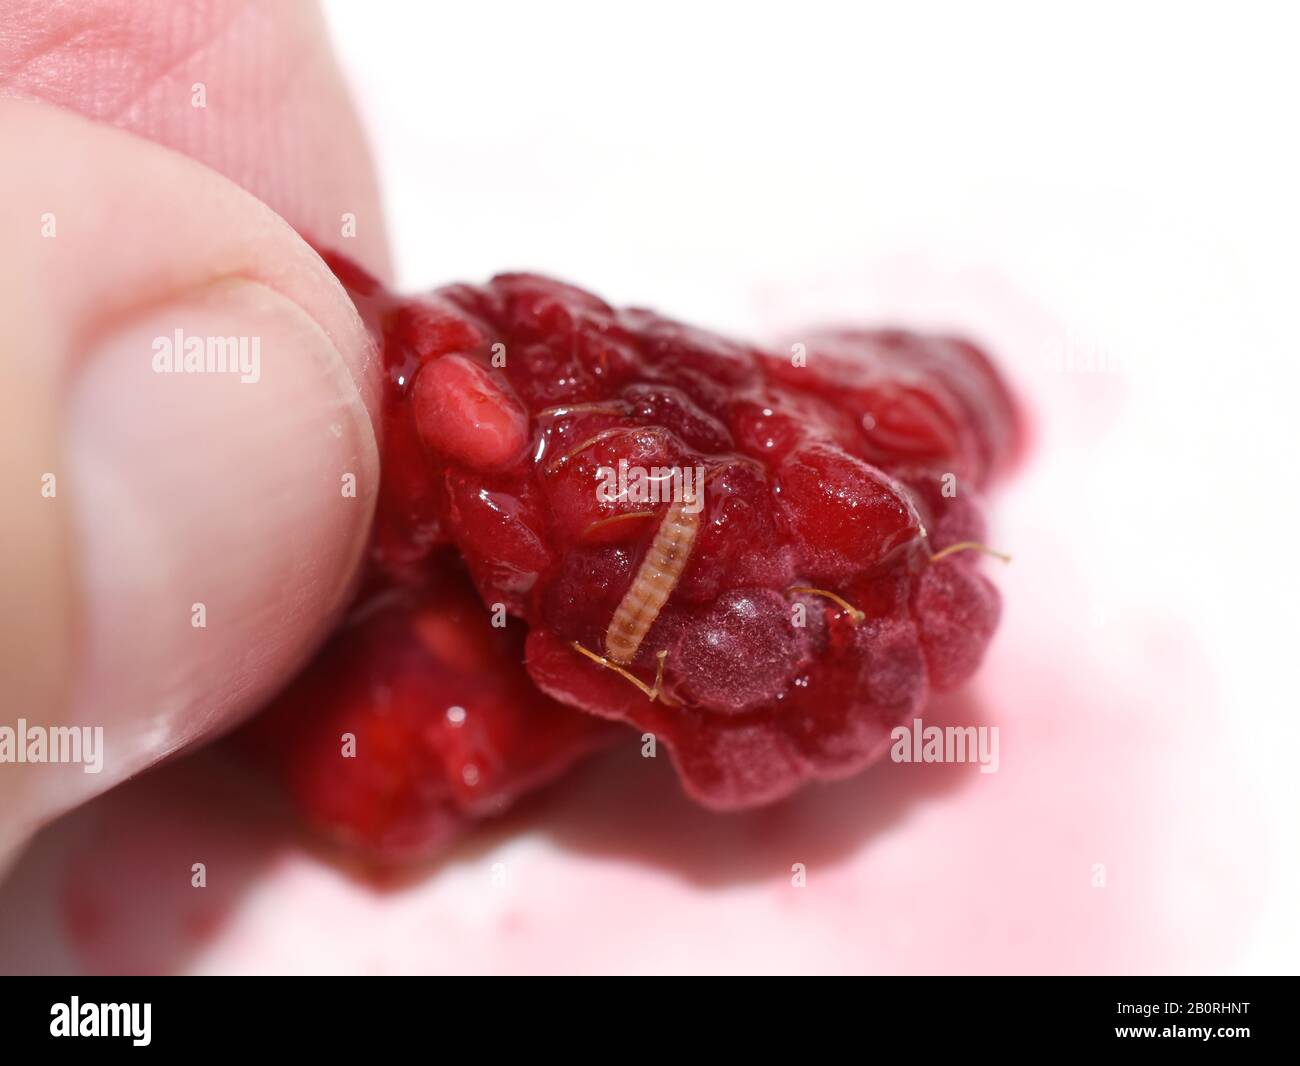 Fruitworm Byturus tomentosus in a red raspberry Stock Photo